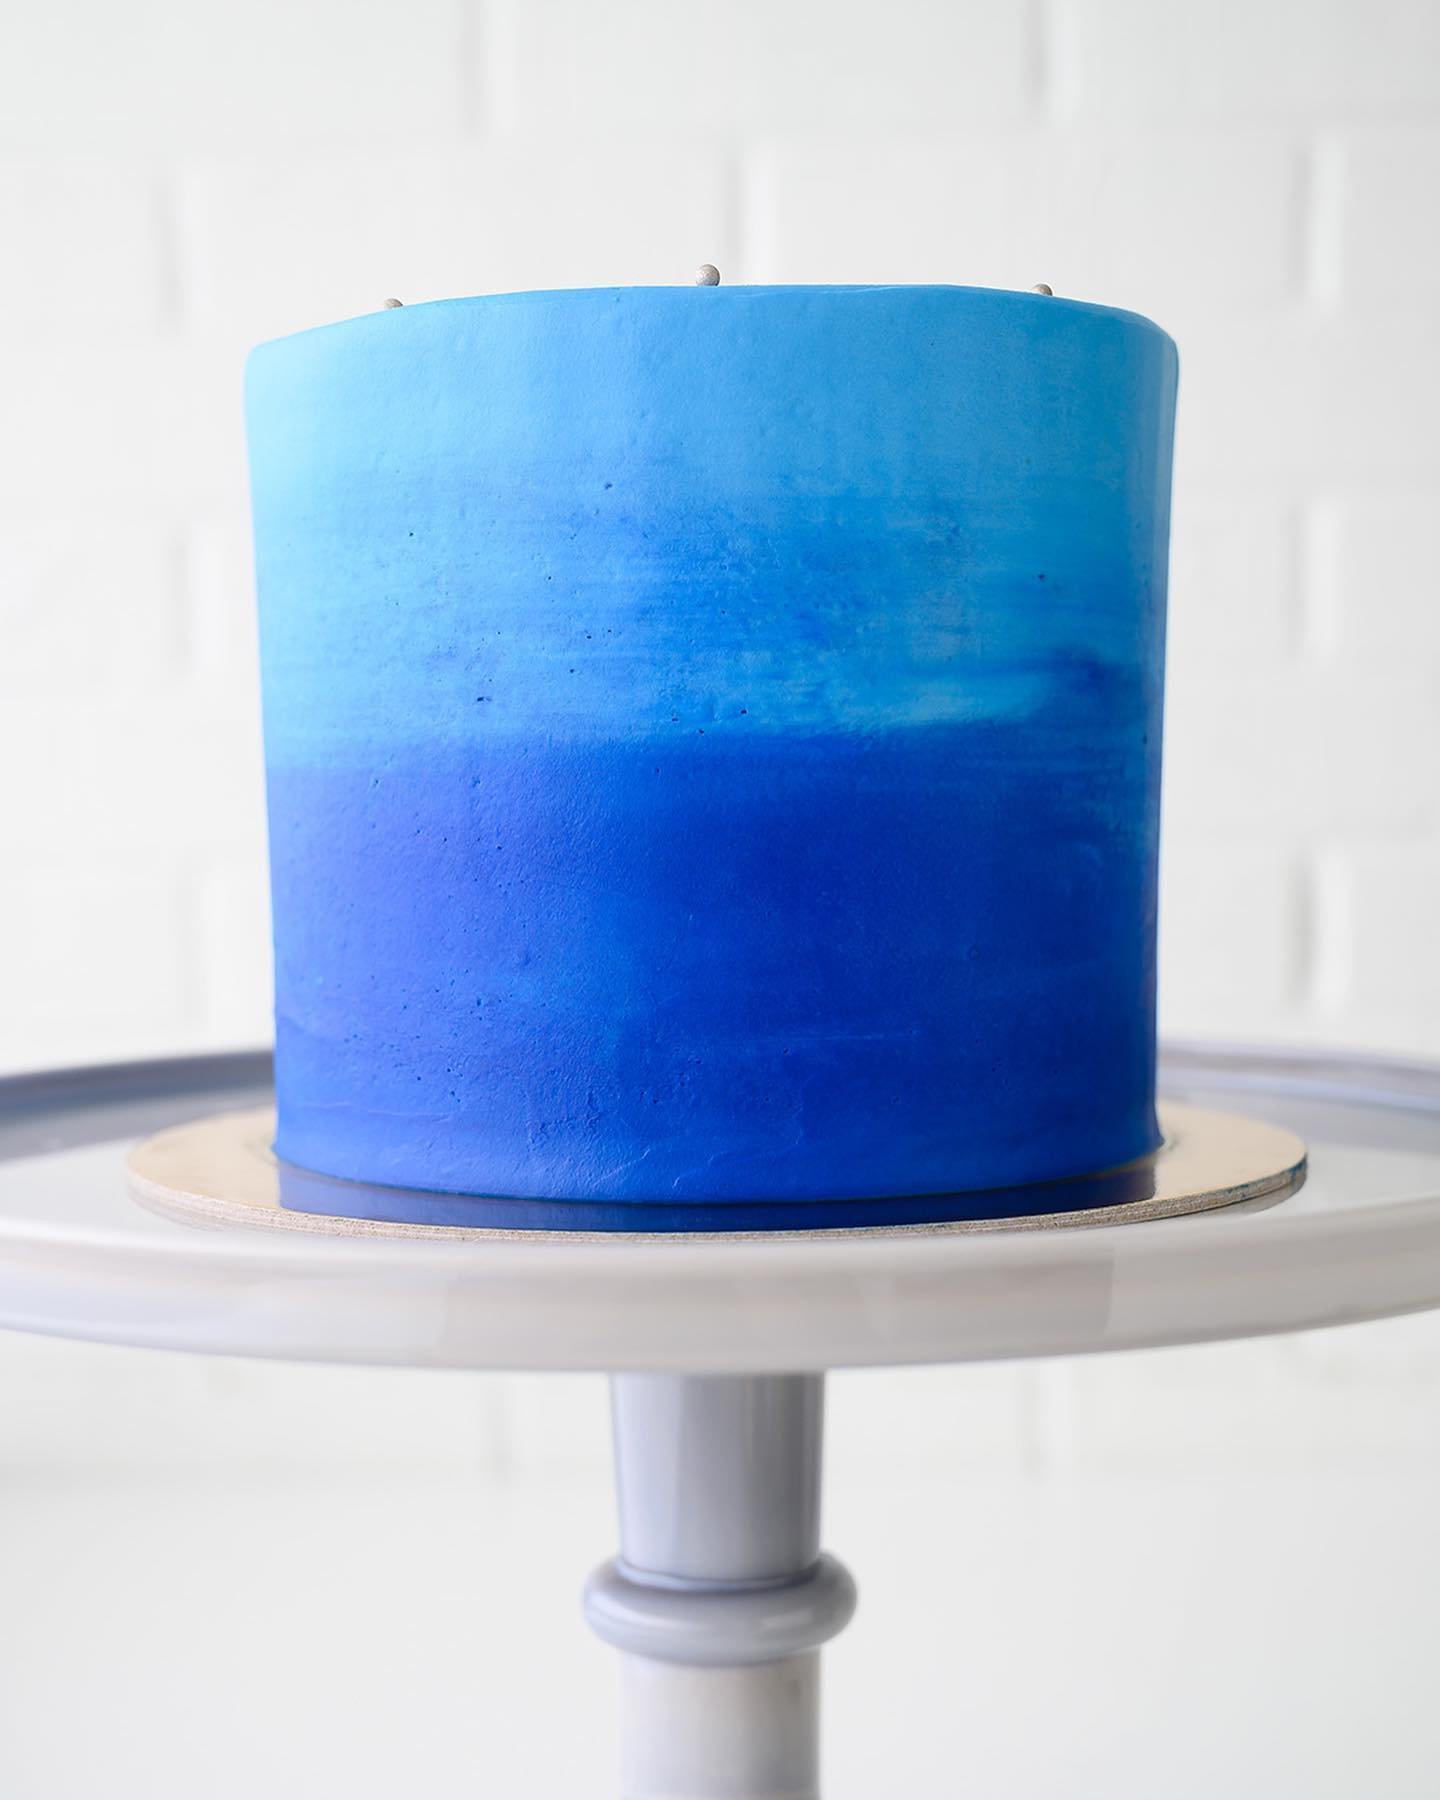 6&rdquo; Tonal Gradient in Royal Blue with silver pearls 💙🩵 Customize your next Made-to-Cake and submit a preorder request at the bio link.